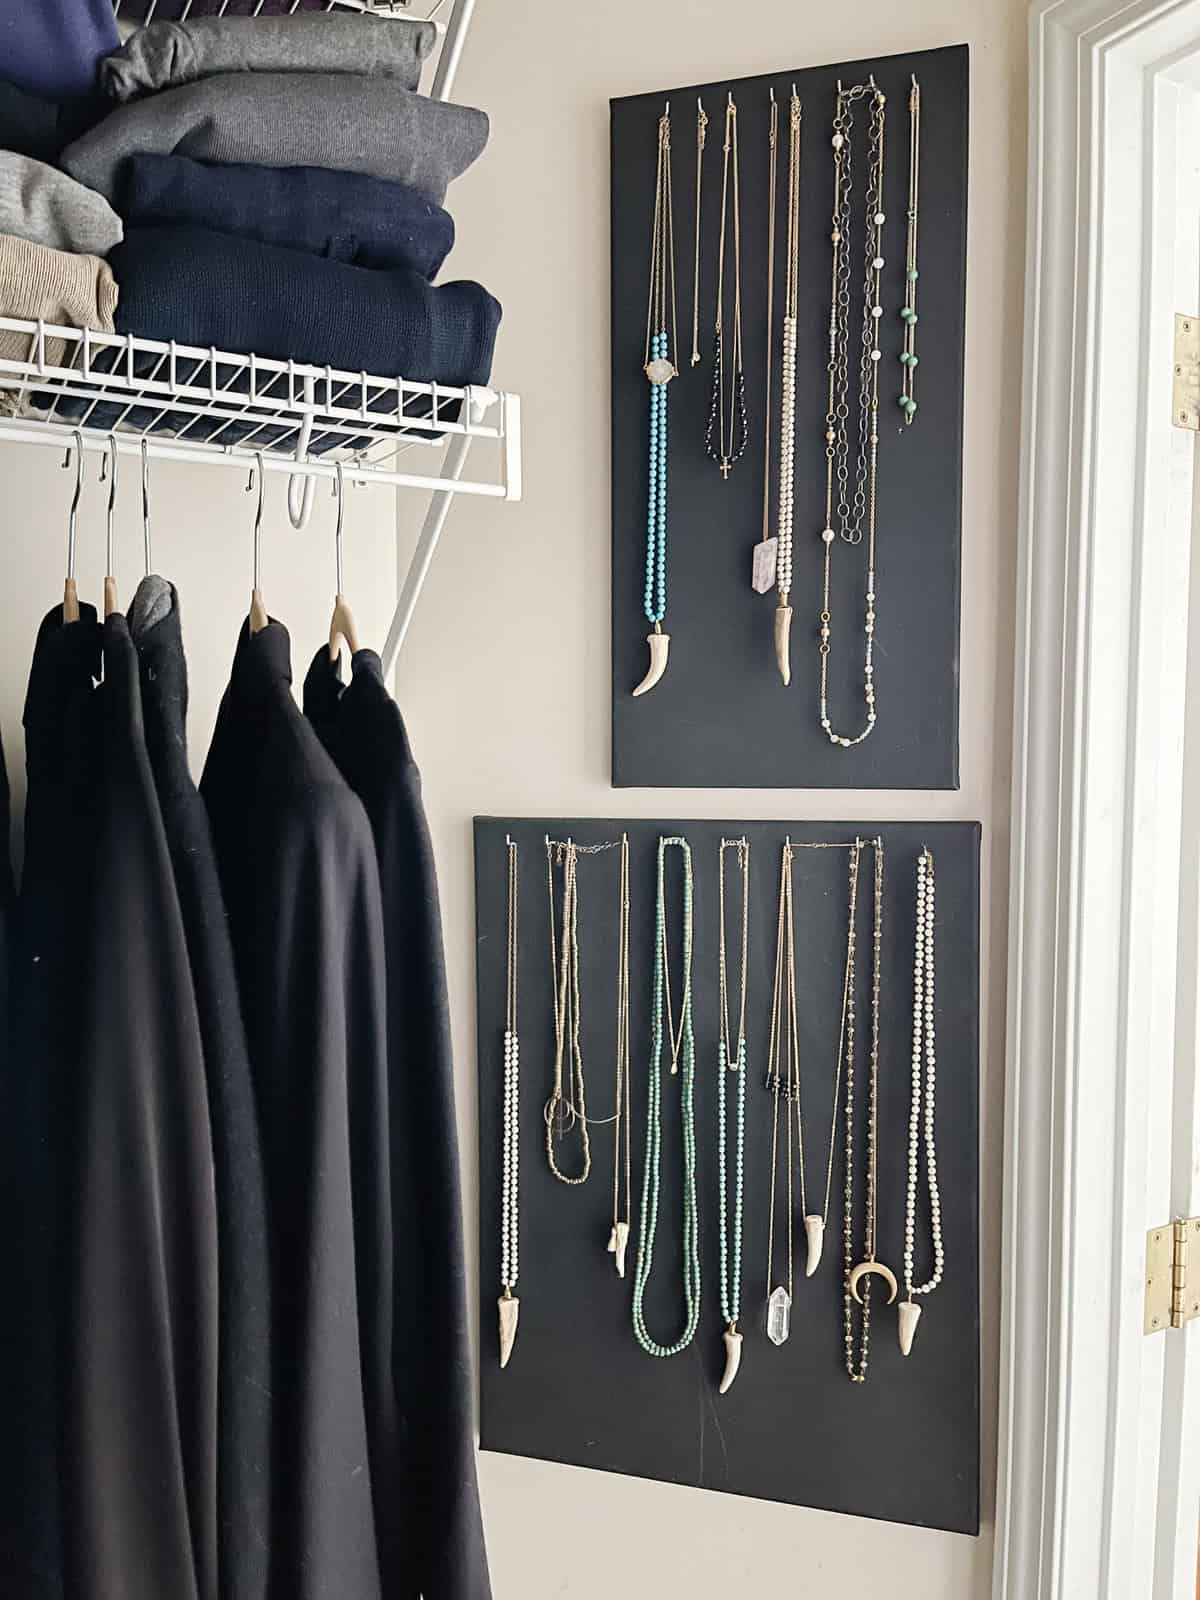 necklaces hanging organized on canvas boards in closet